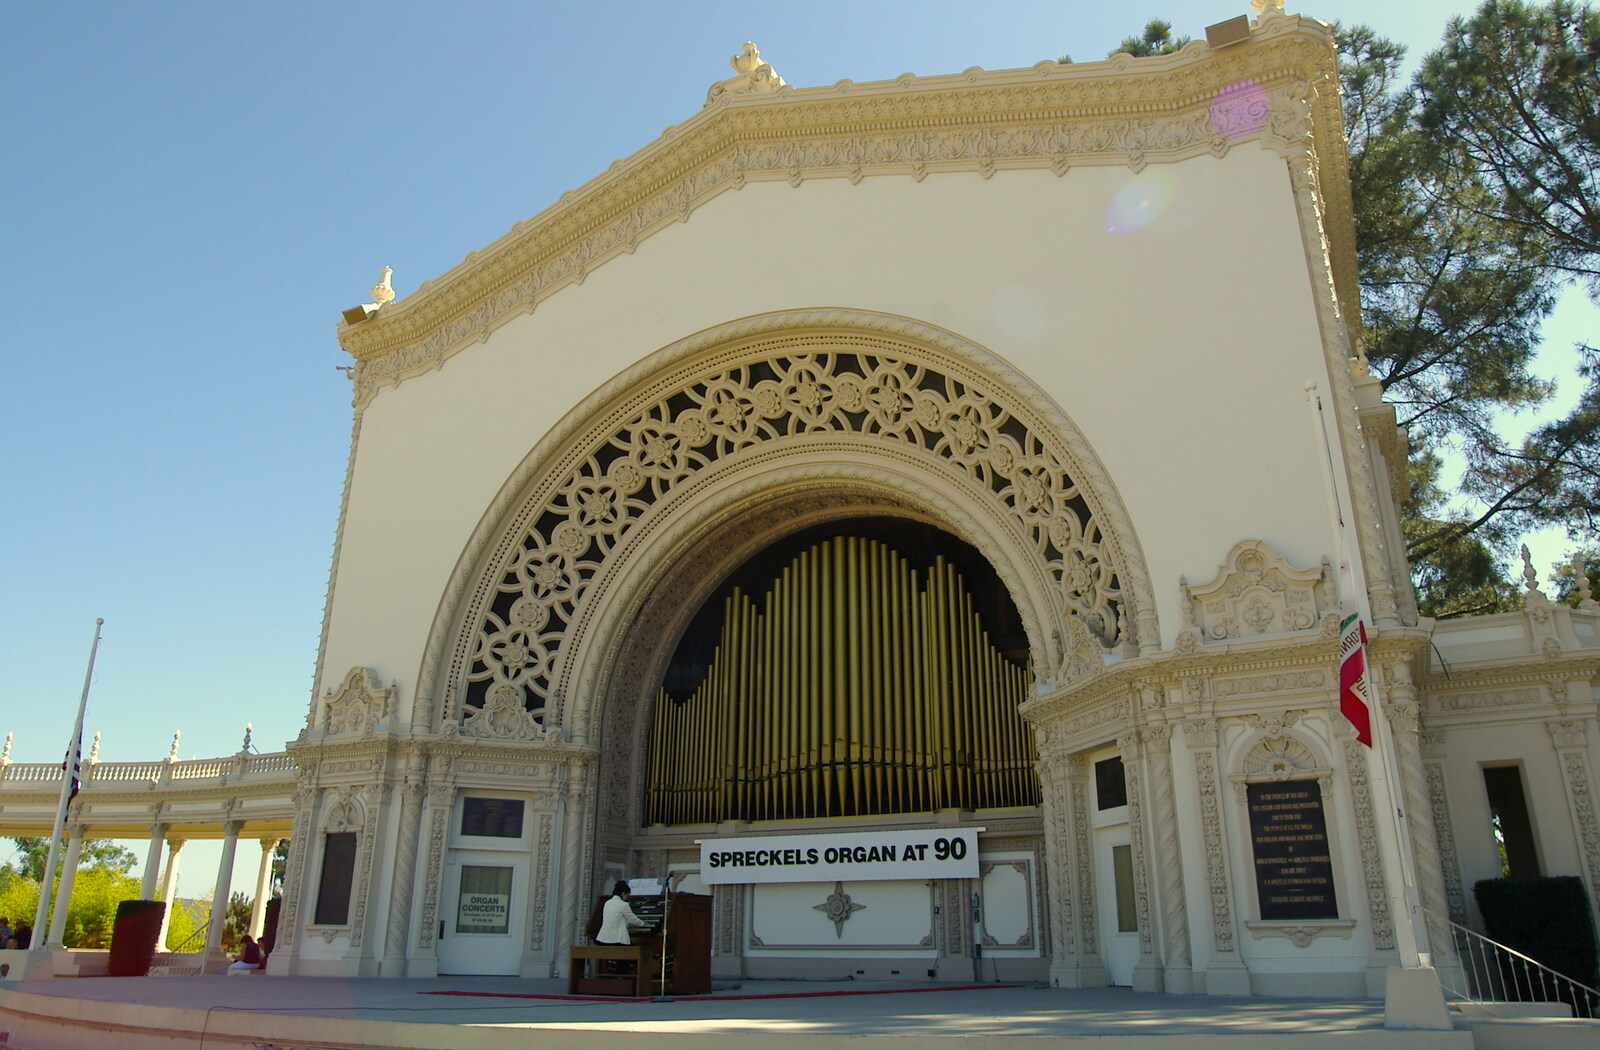 Scenes and People of Balboa Park, San Diego, California - 25th September 2005: The Spreckels Organ